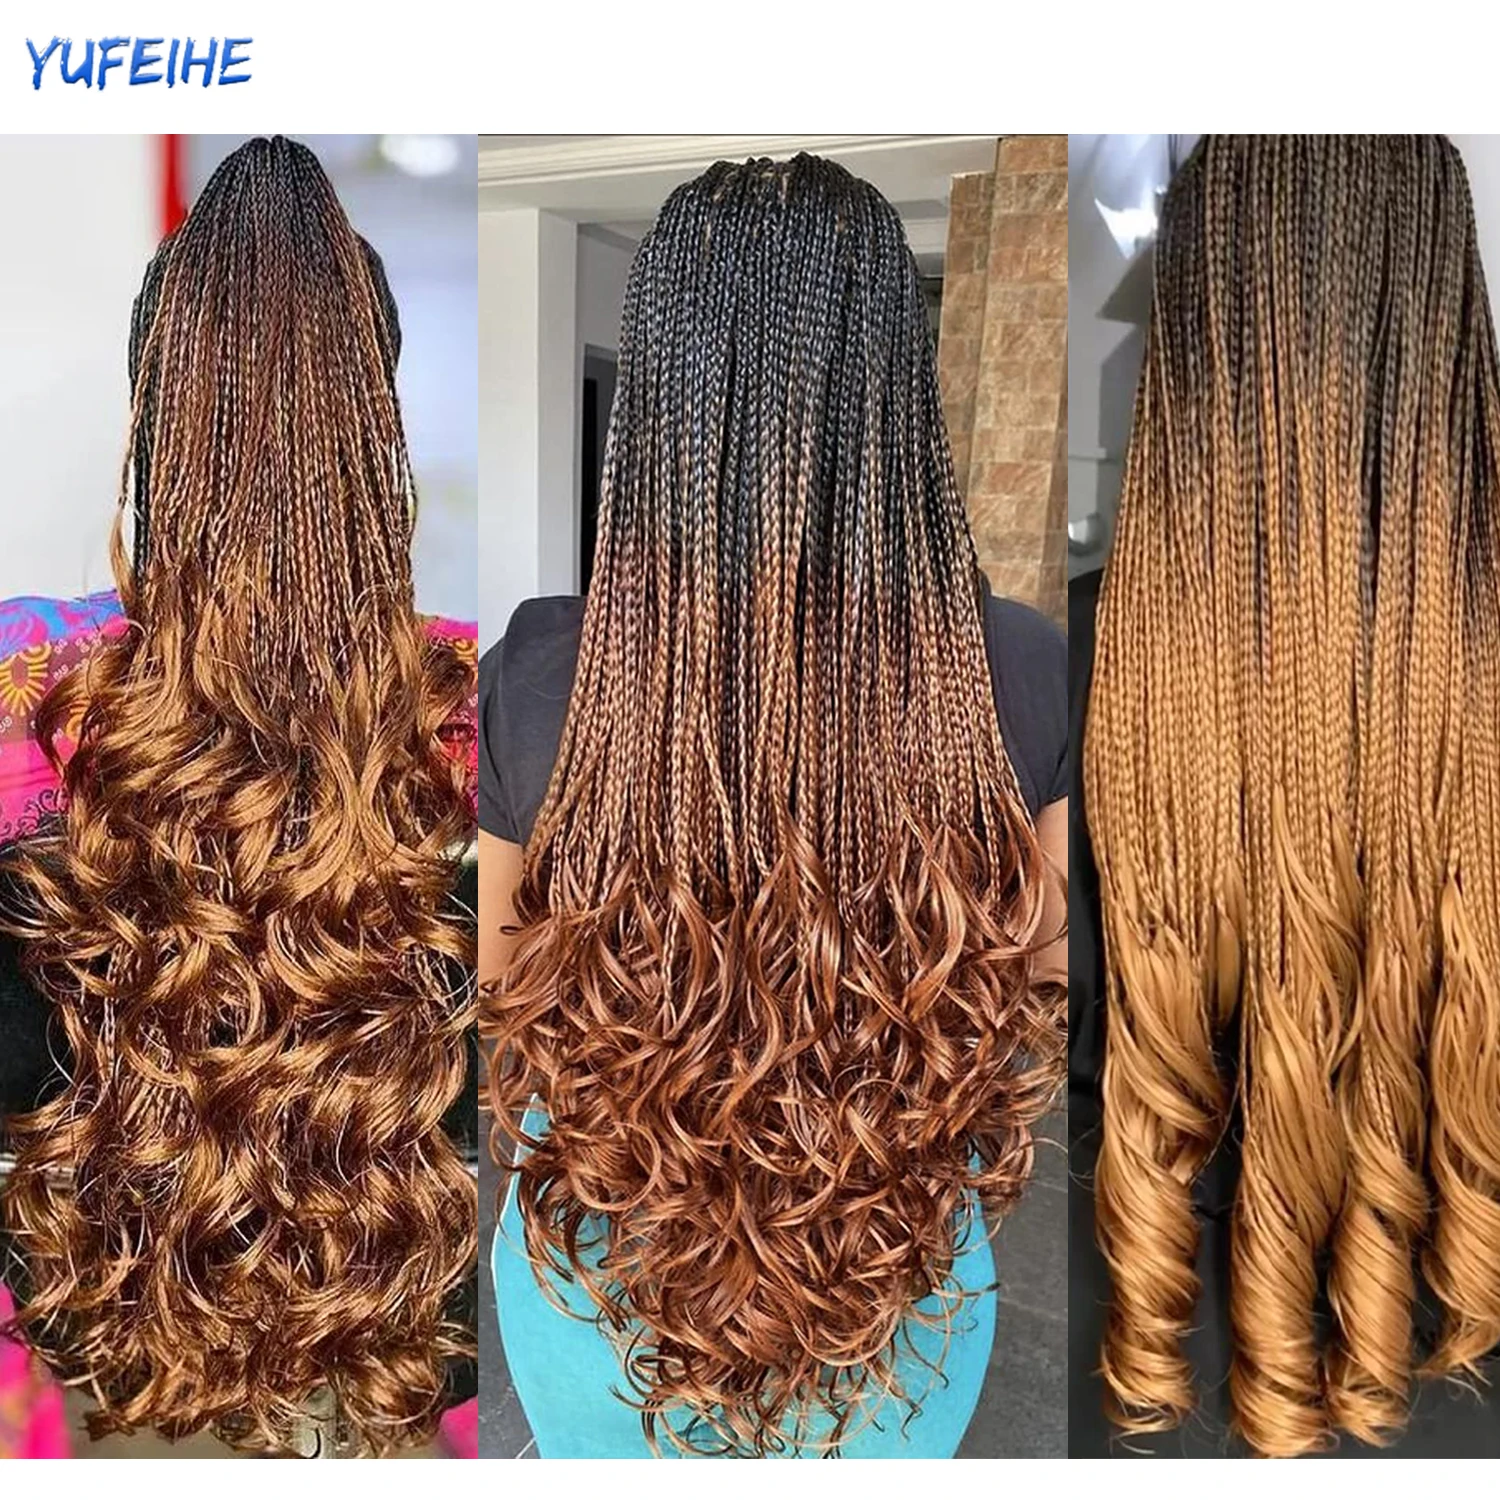 

French Curl Braids Synthetic Loose Wave Crochet Hair Pre Stretched Spiral Curly Braiding Hair Extensions 22 Inch Ombre Brown